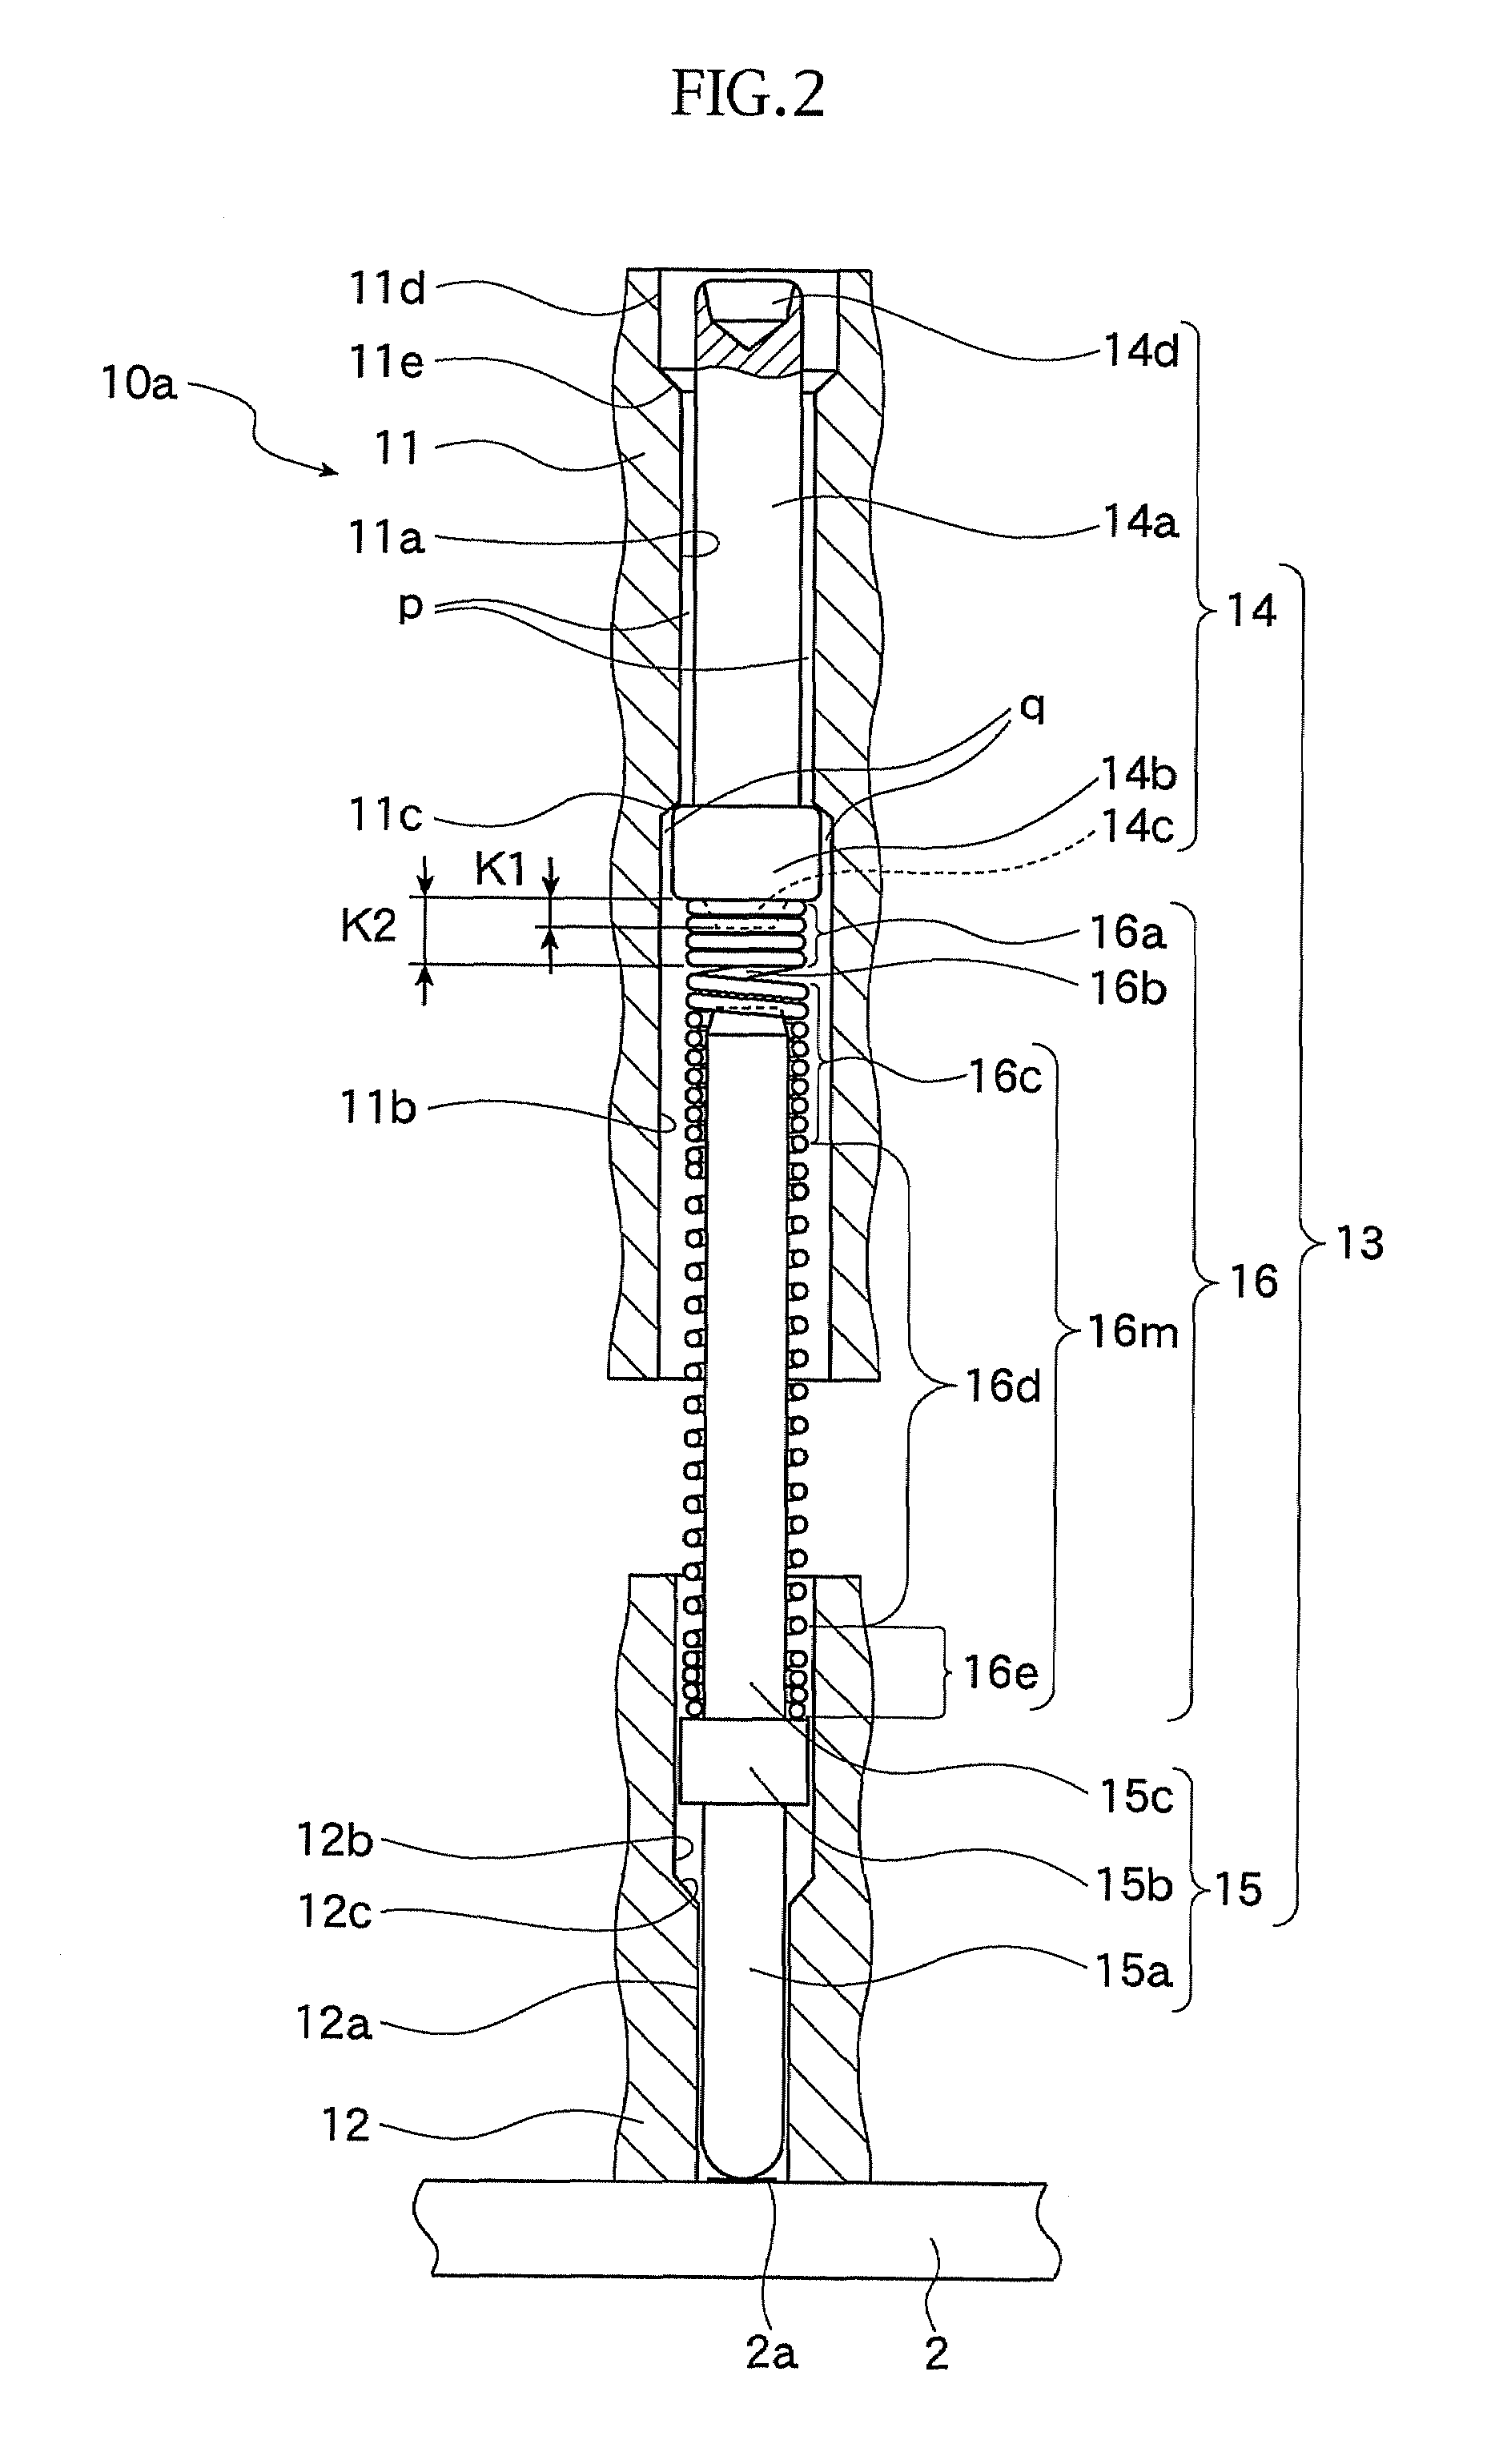 Electric contact and socket for electrical part